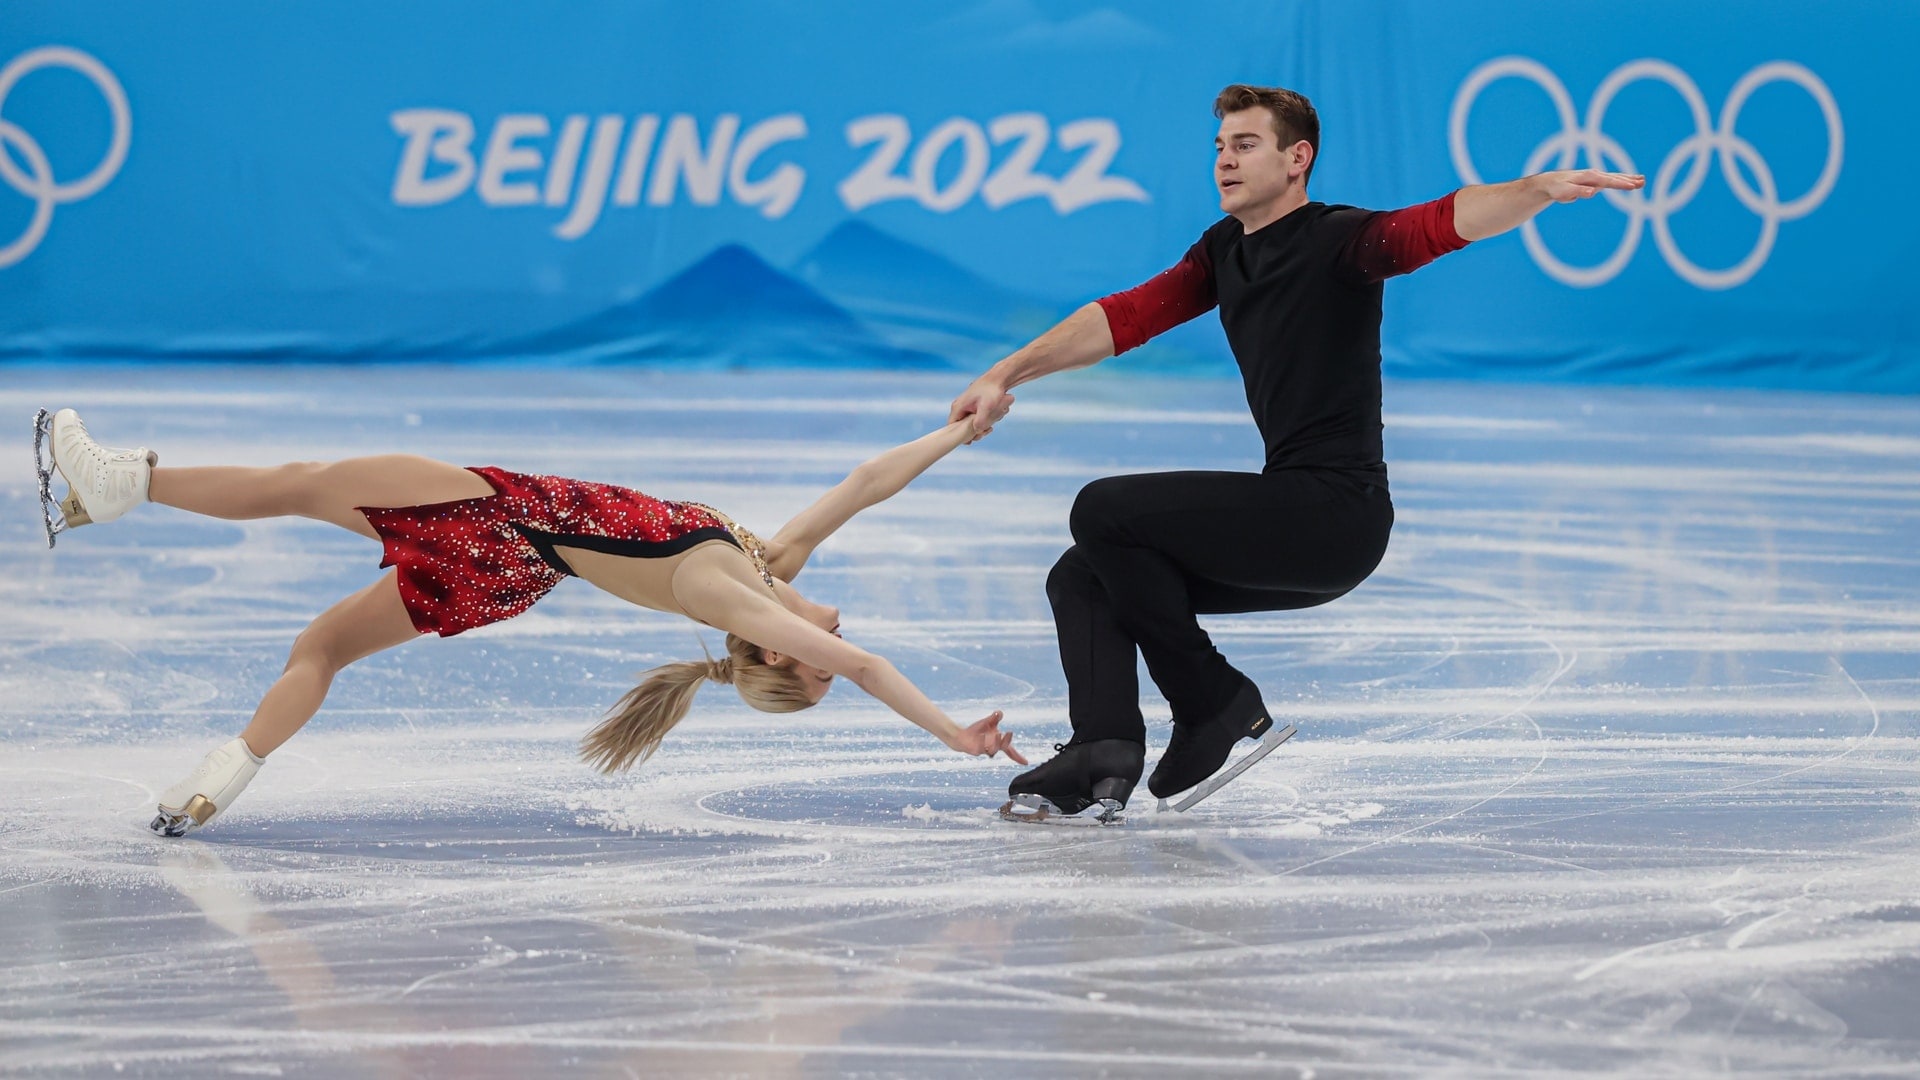 Pair Skating: Knierim and Frazier, A death spiral, Olympic Team Event silver medalists. 1920x1080 Full HD Wallpaper.